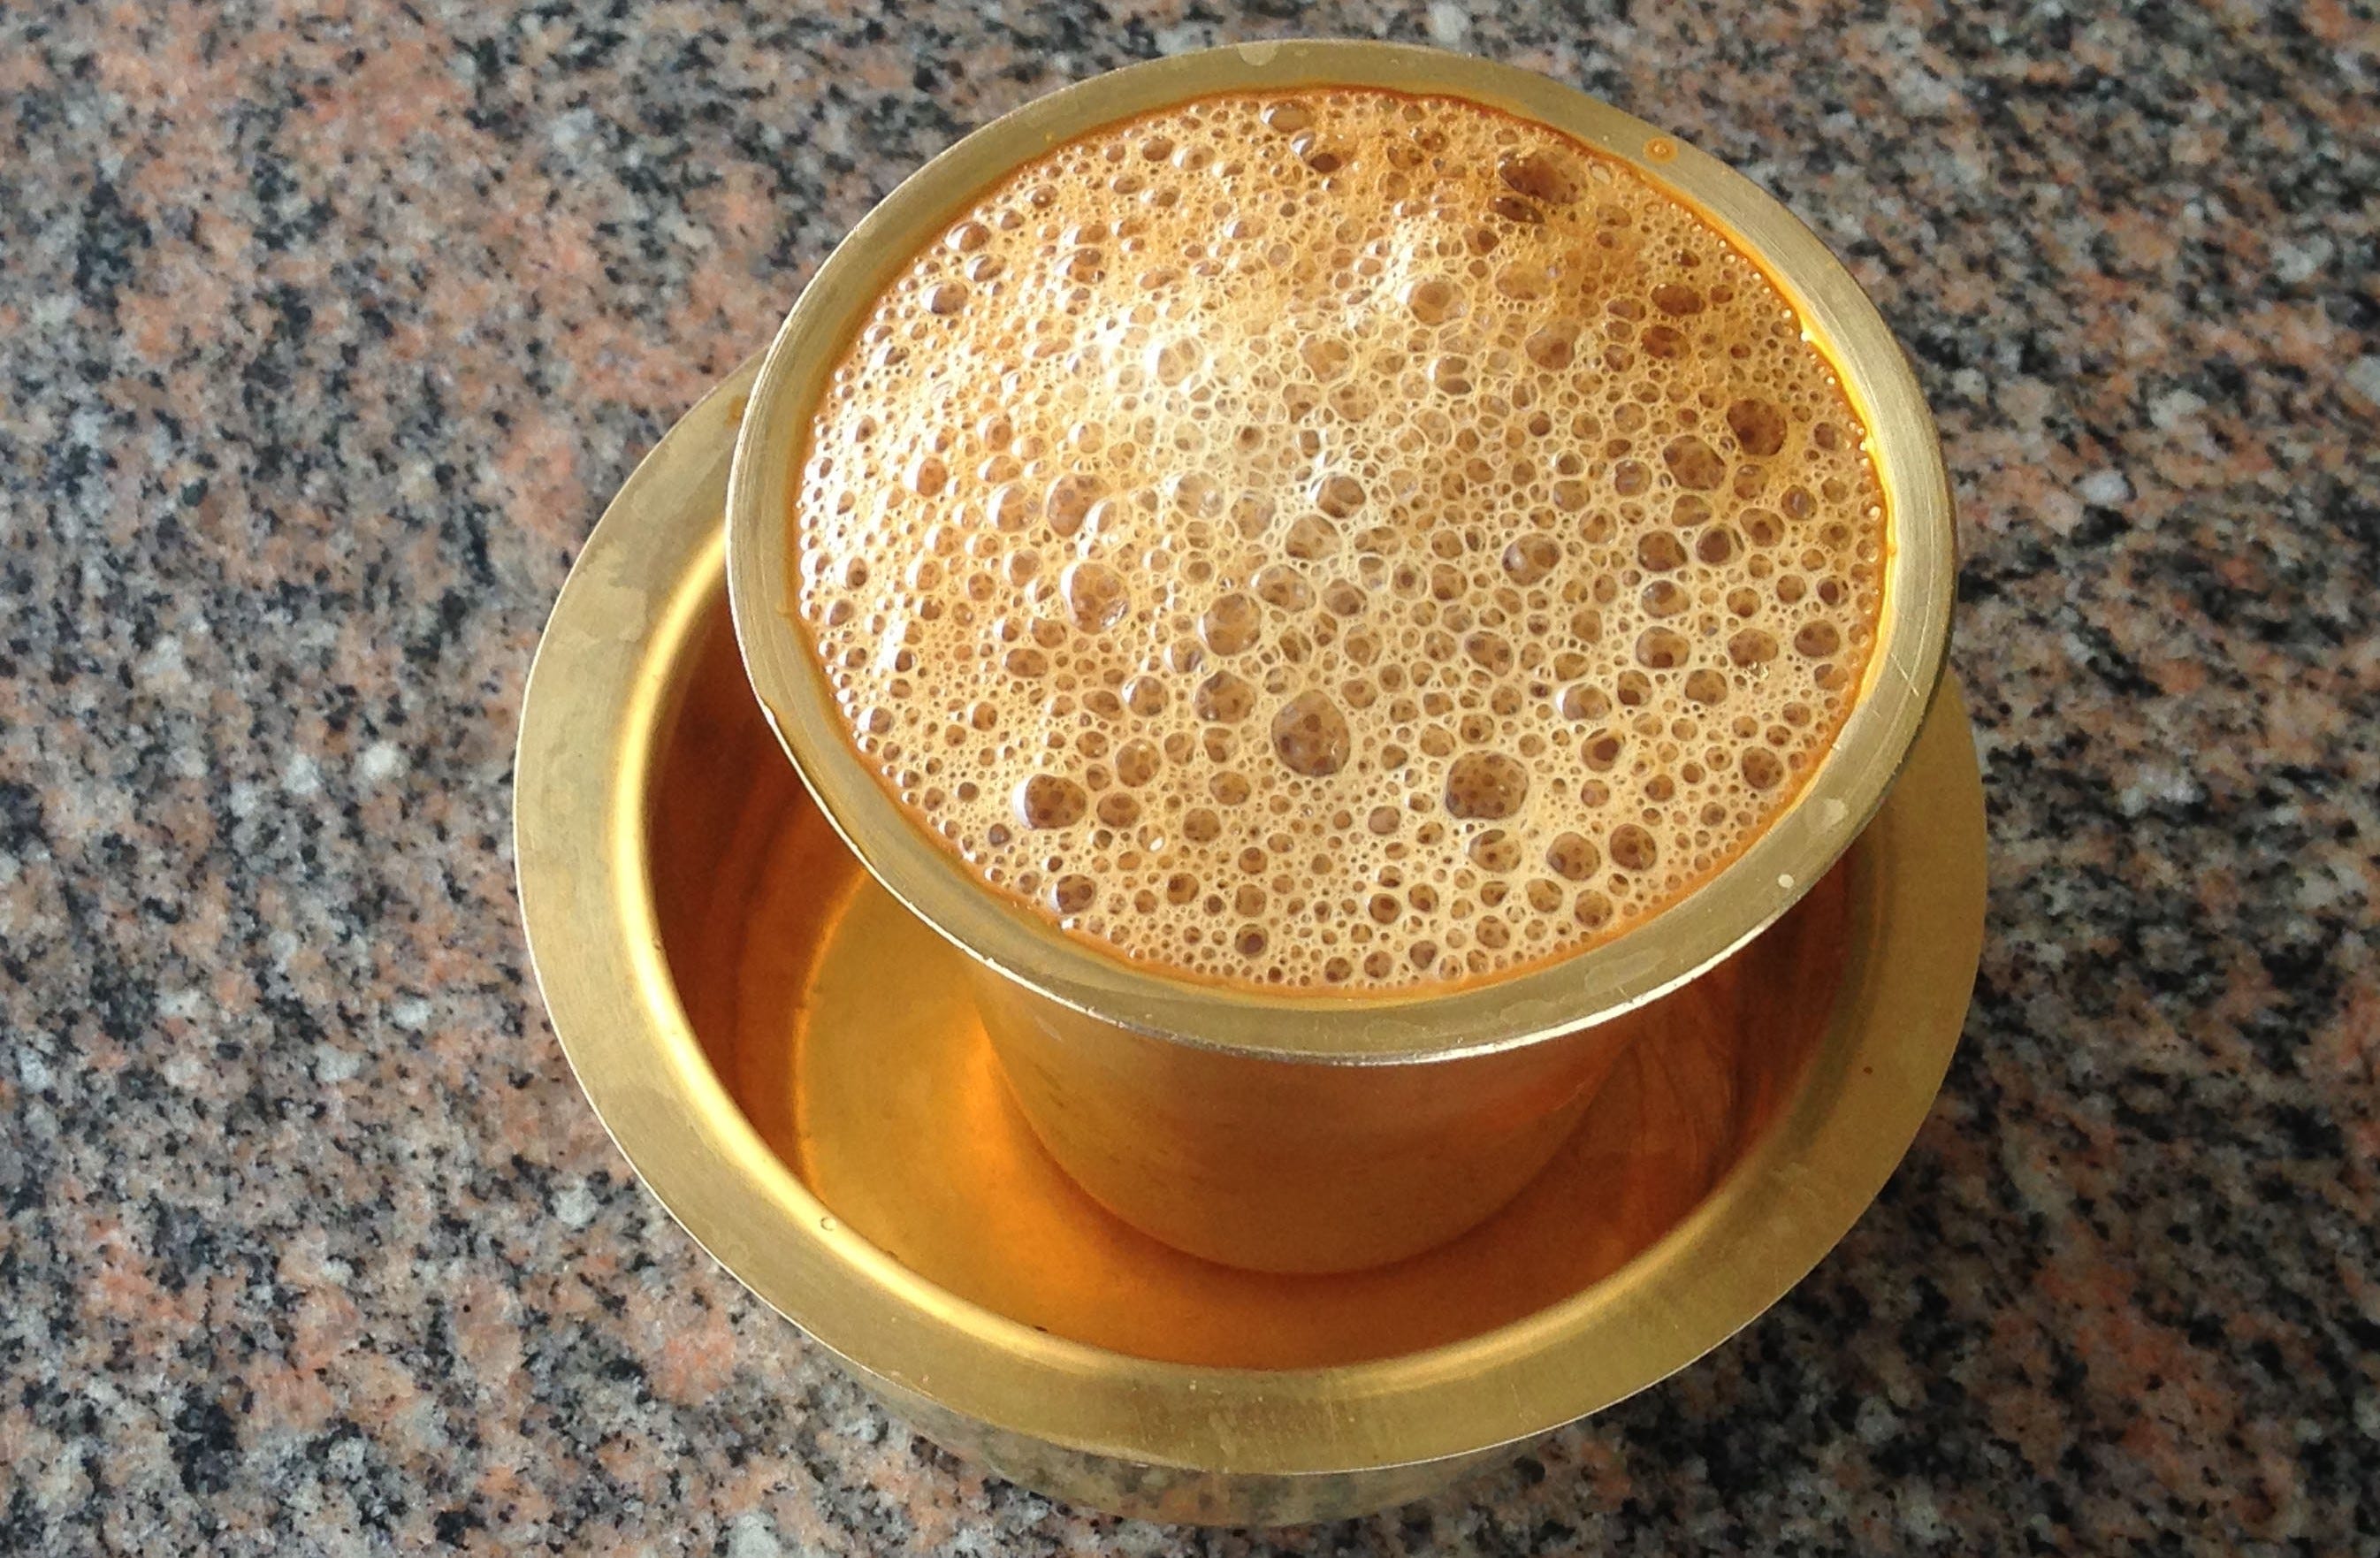 Filter Coffee In Tamil